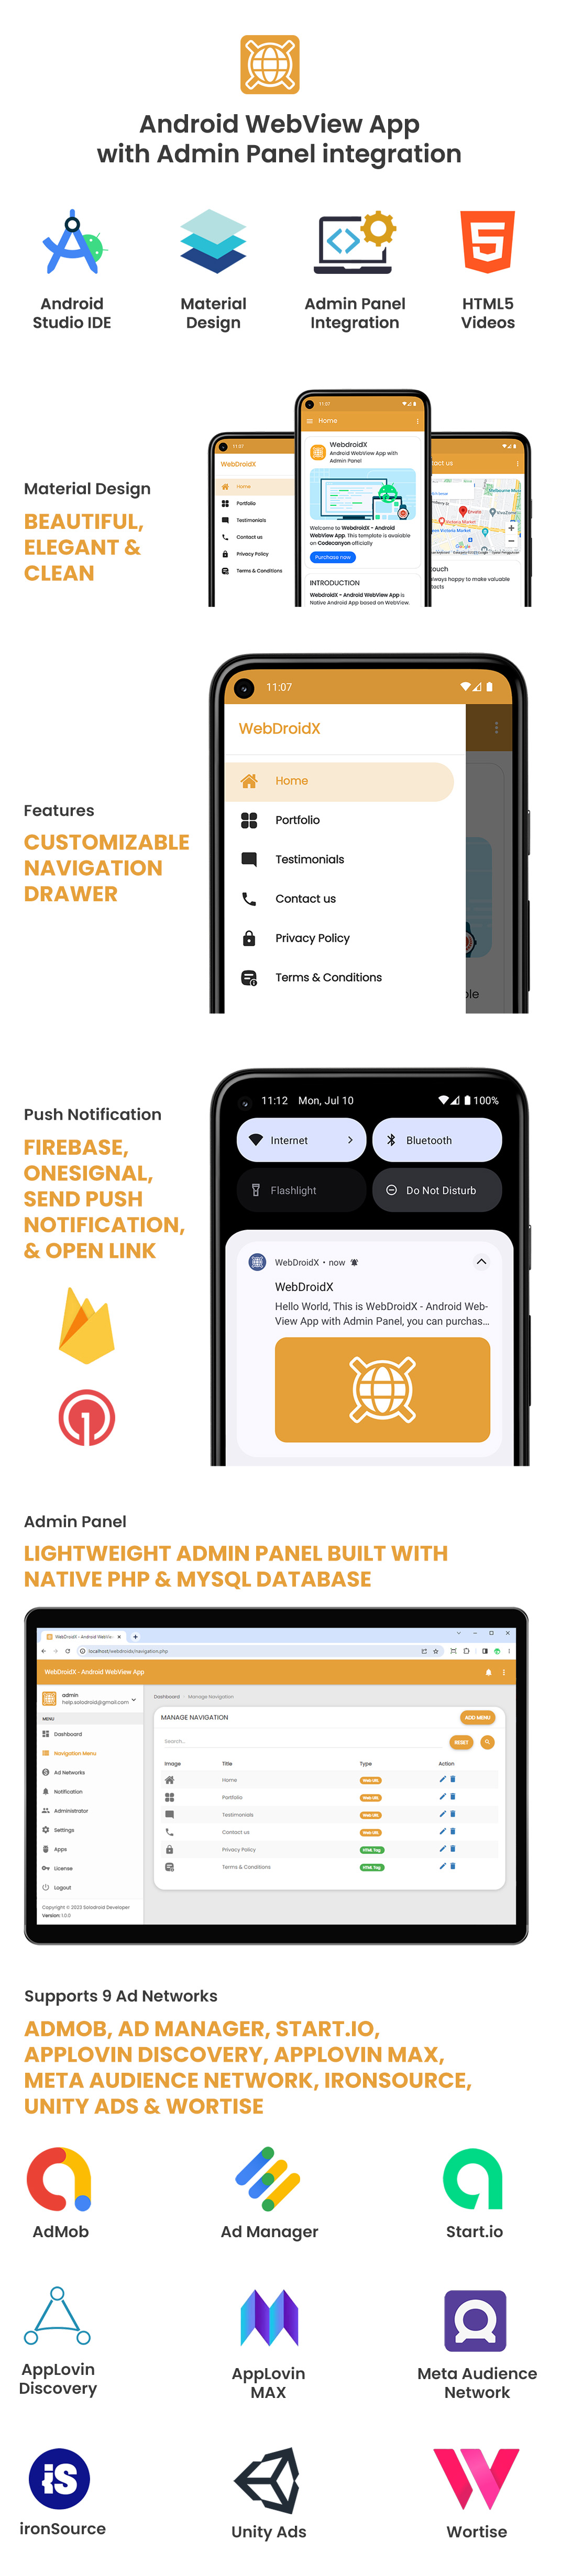 WebDroidX - Android WebView App with Admin Panel - 1